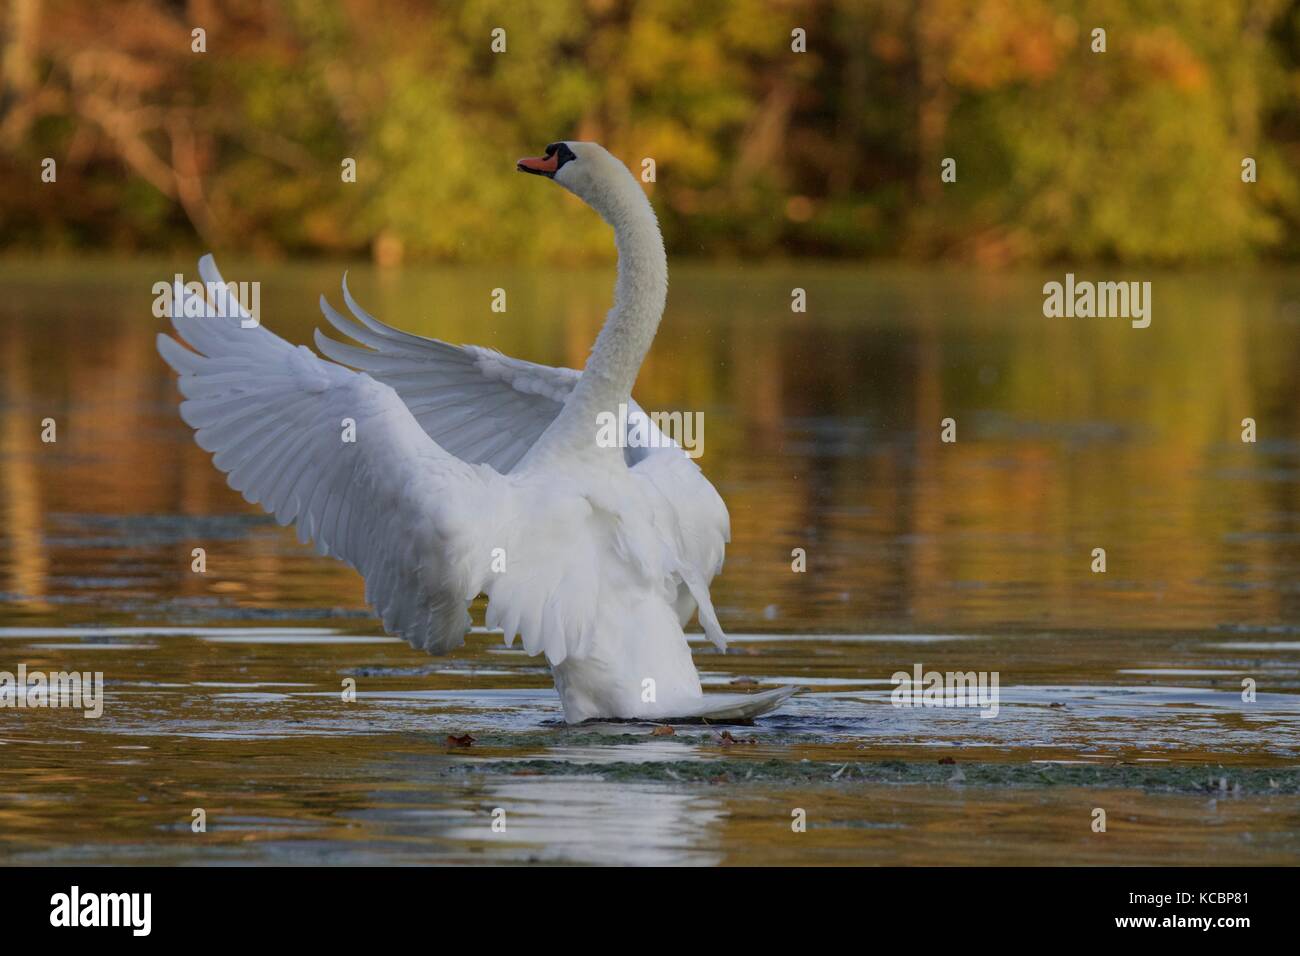 A mute swan Cygnus olor flapping its wings on a golden lake in Fall Stock Photo